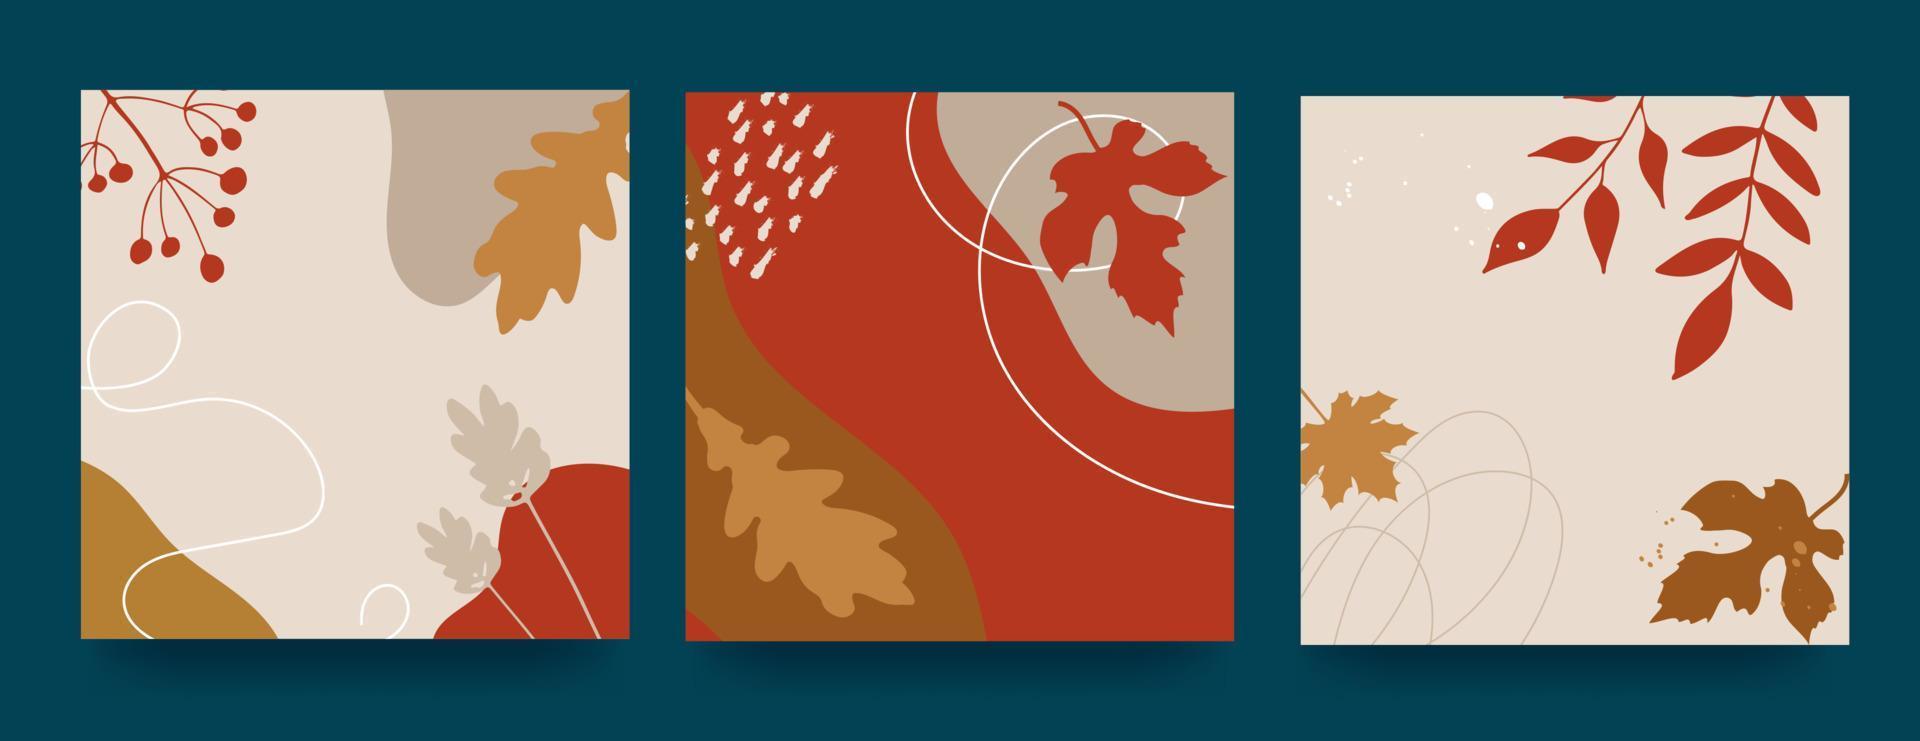 Autumn abstract poster in modern hipster style. Autumn leaves, berries, spots. Trendy modern art with autumn elements. Vector illustration